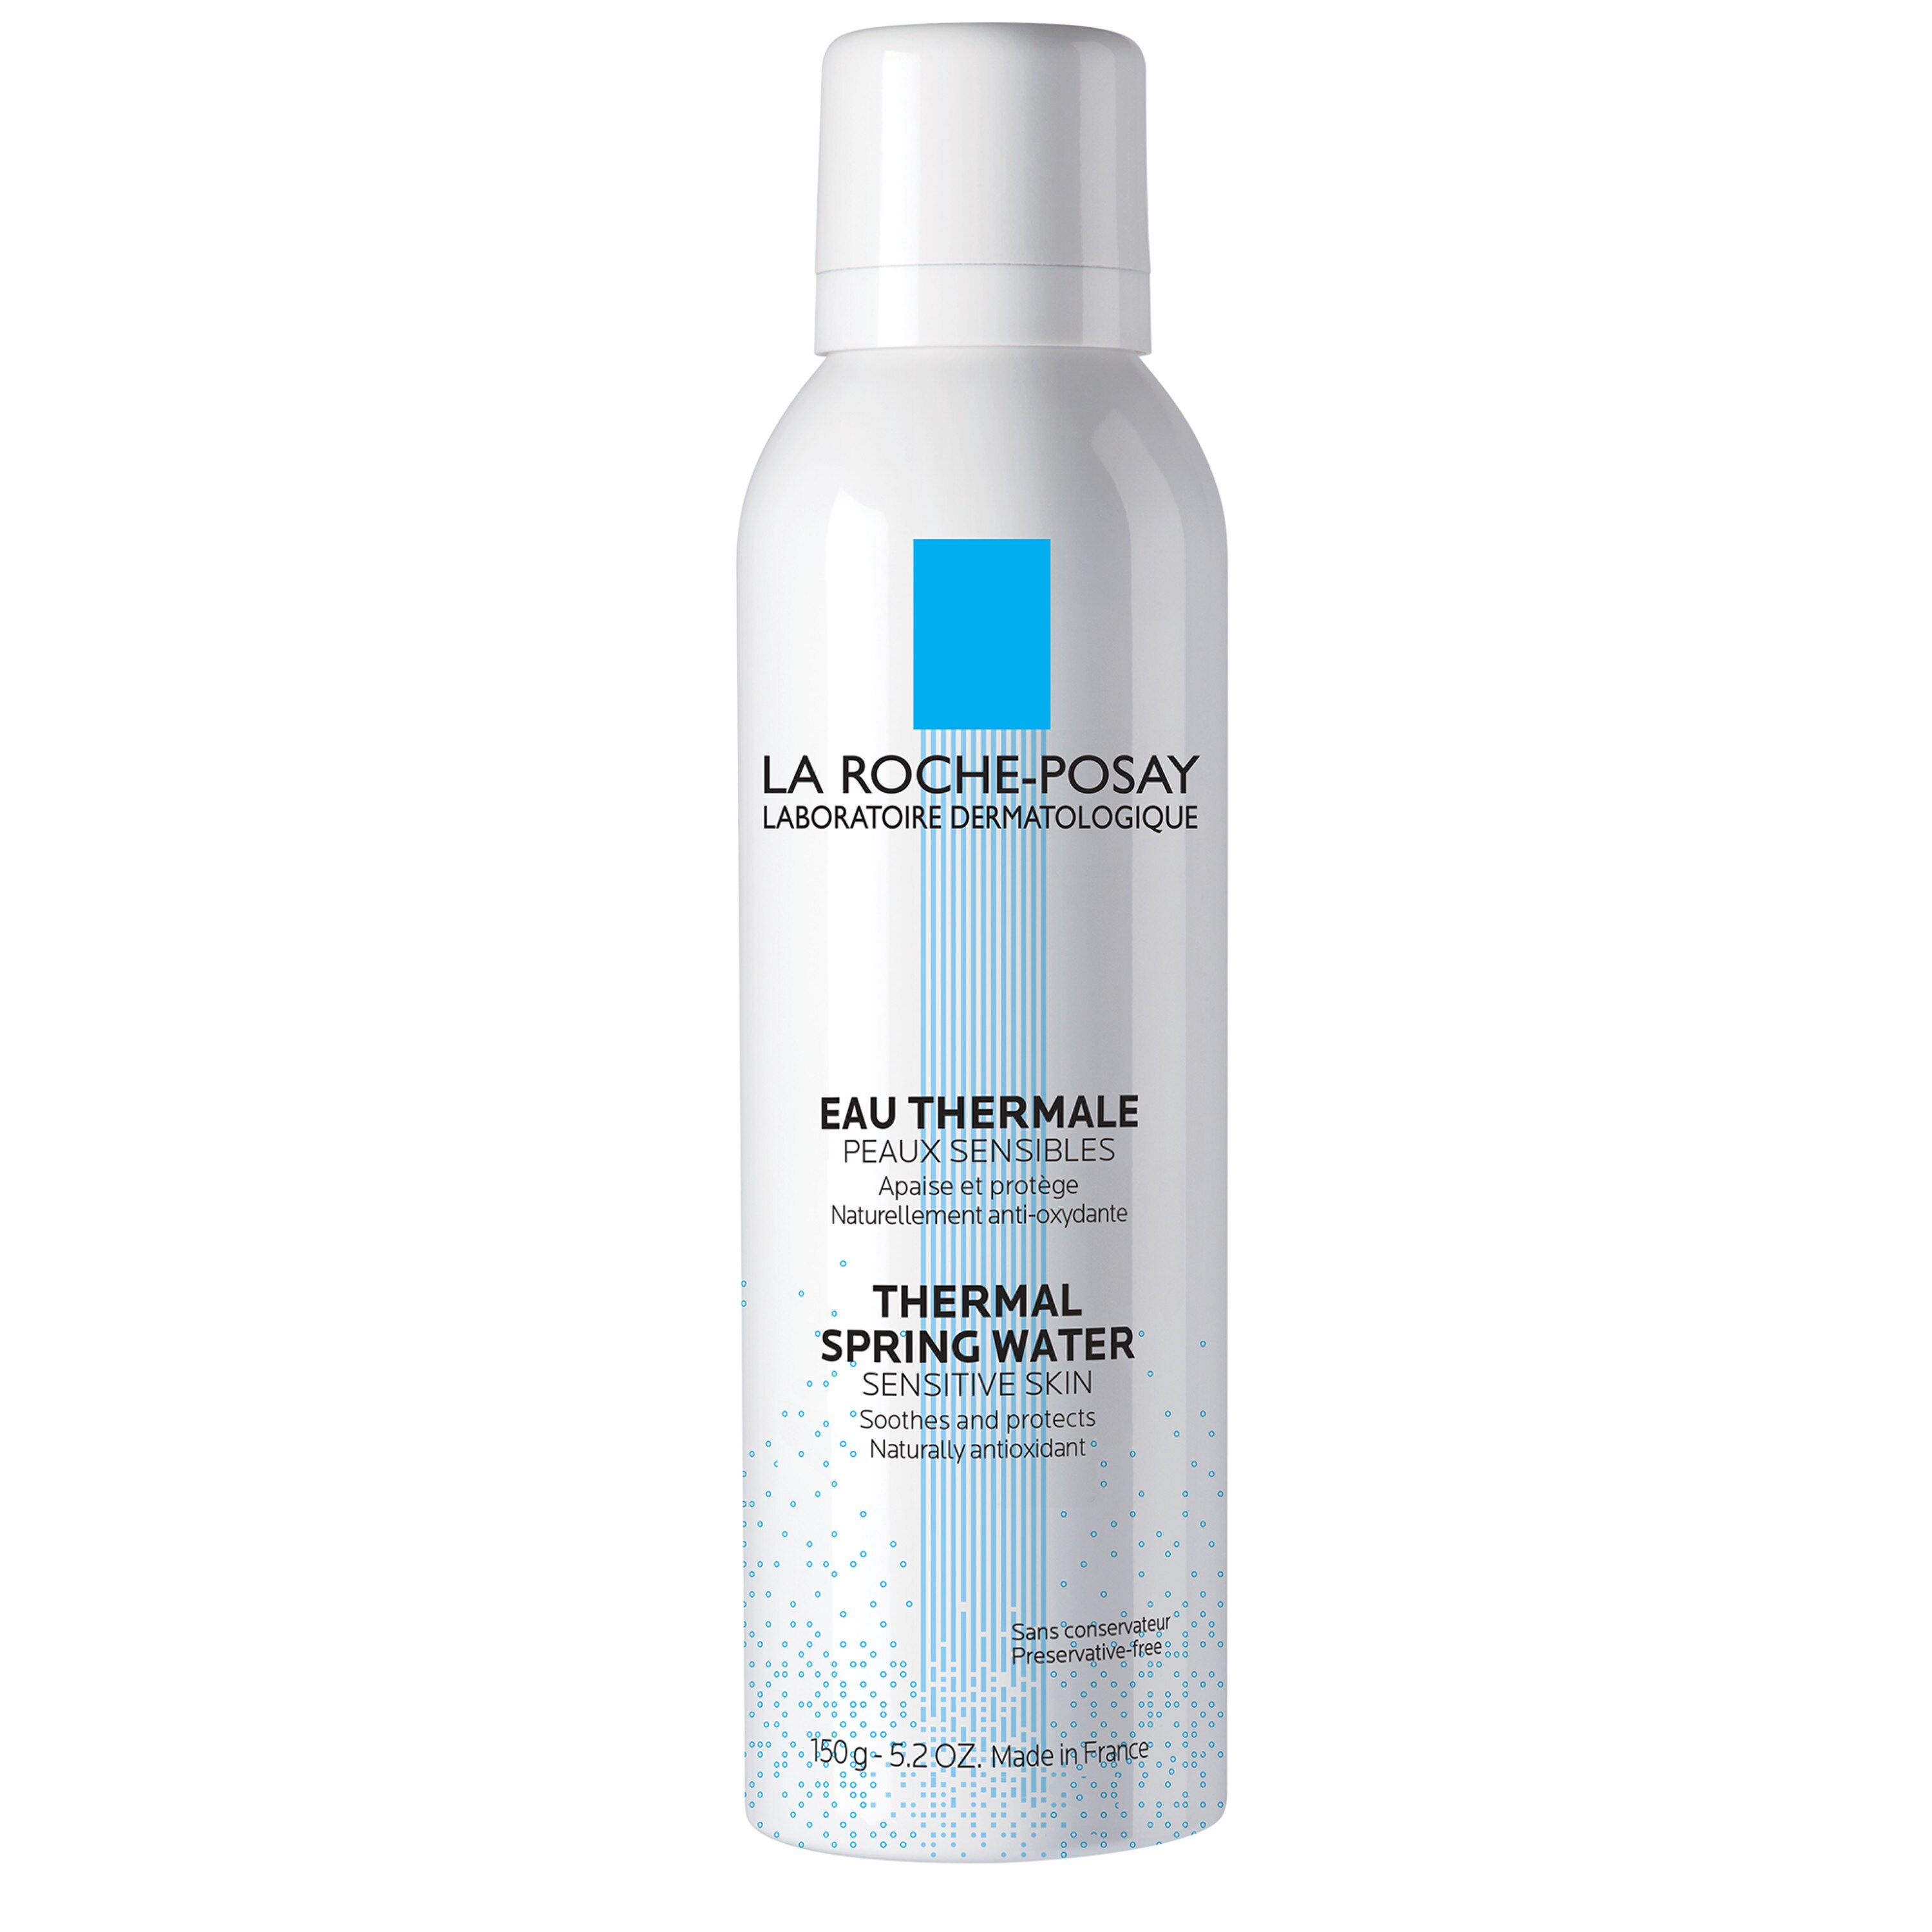 La Roche-Posay Thermal Spring Water Face Mist for Sensitive Skin